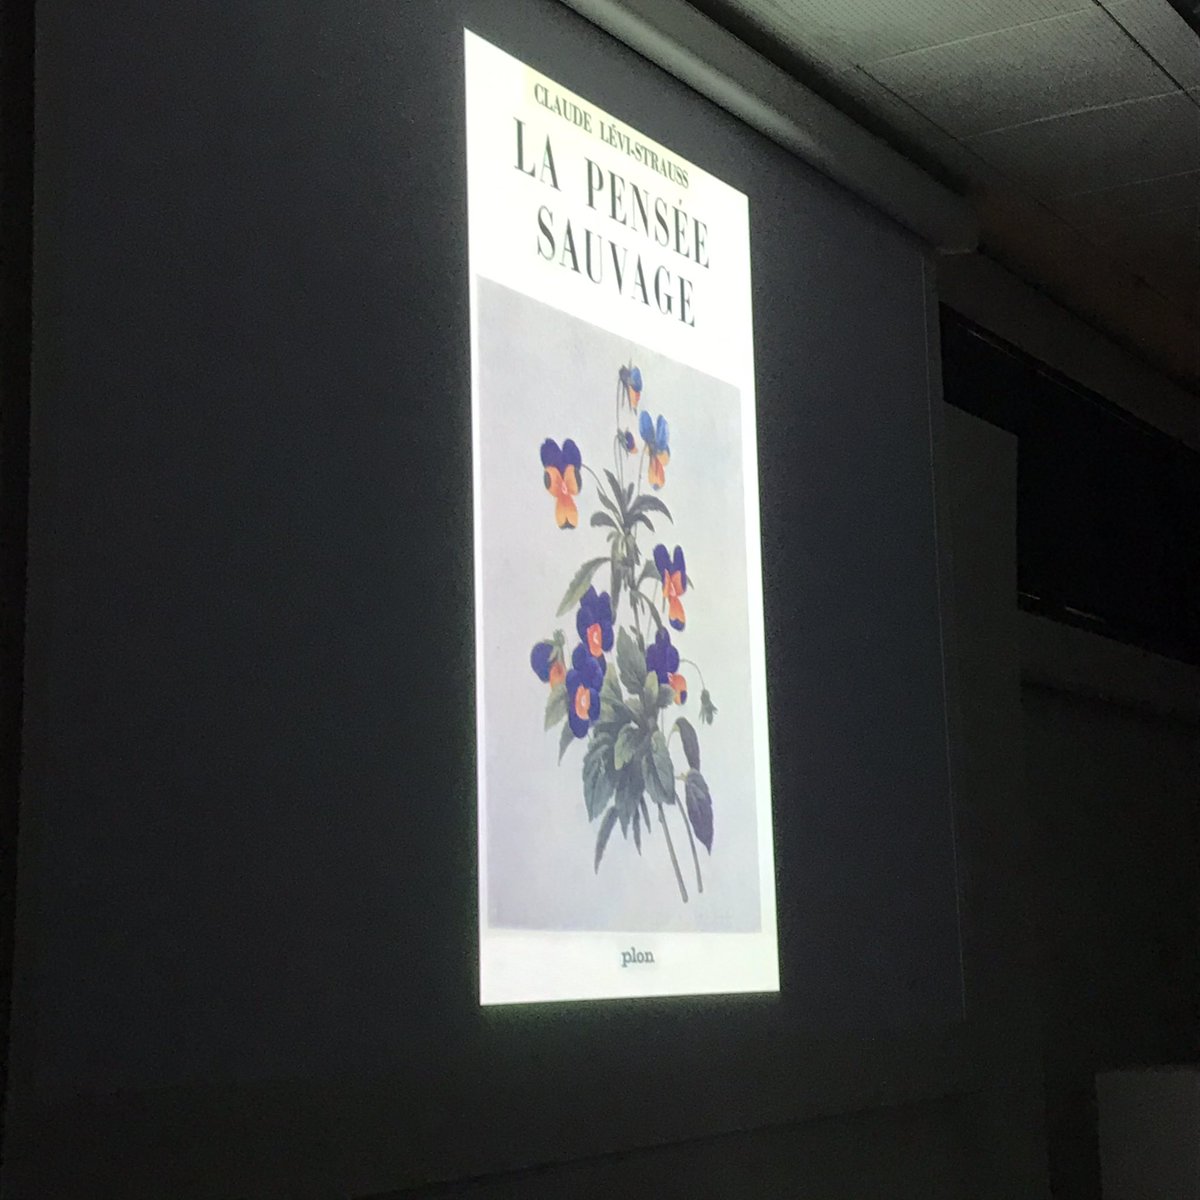 The Savage Mind: @takeshihayatsu introduces the work of his practice, the fifth in our series of Public Lectures @uniofbrighton @artsbrighton #SoAD